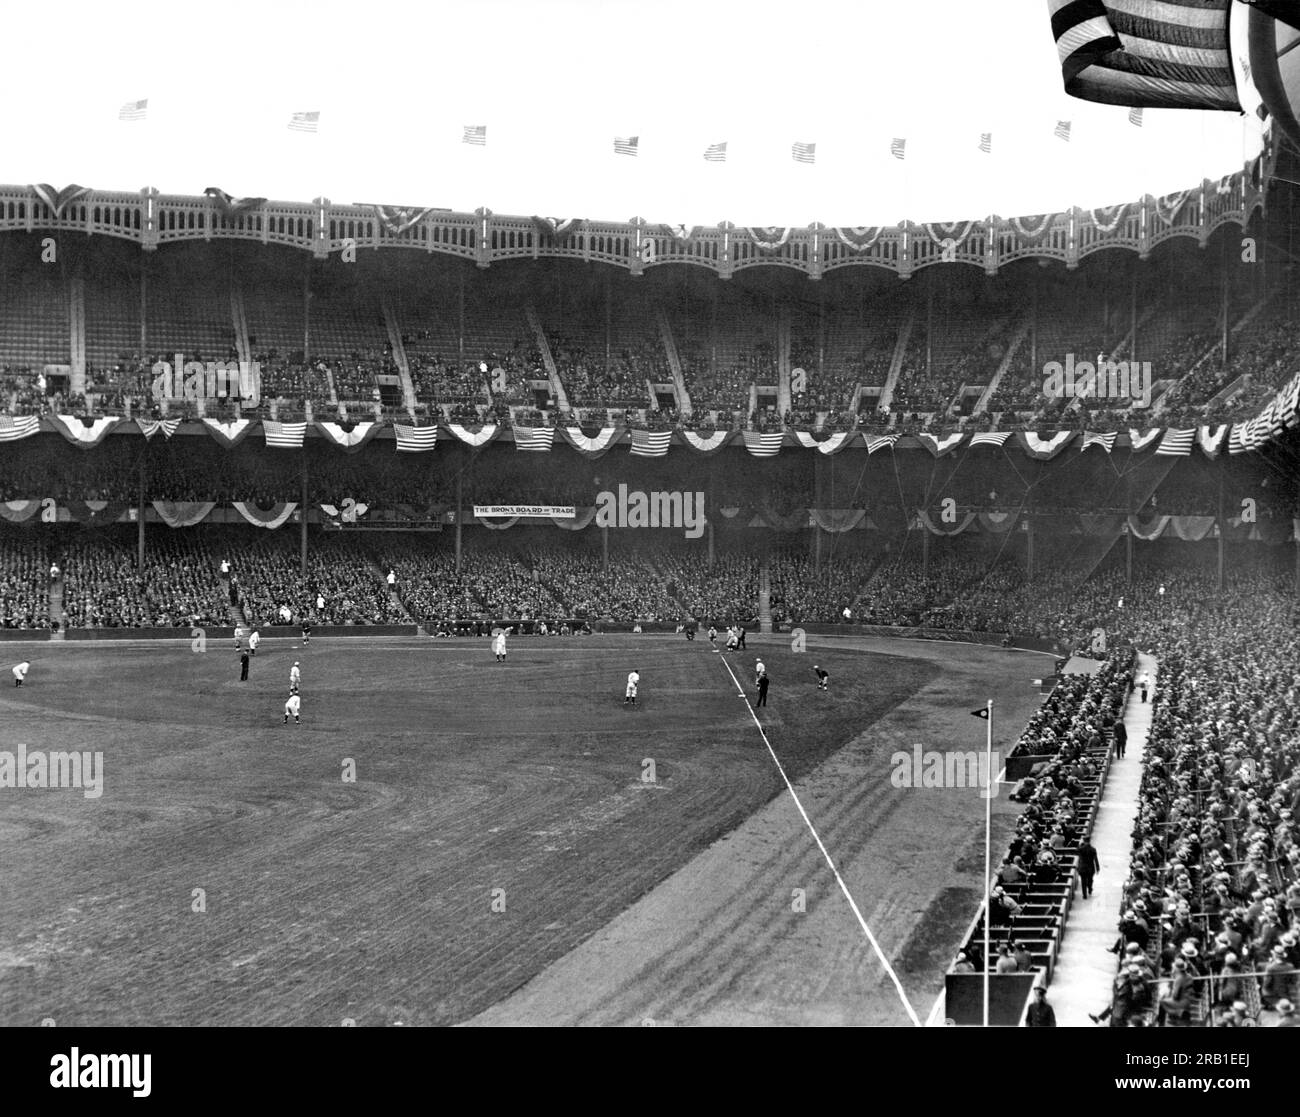 New York, New York:  c. 1926. A view of Yankee Stadium and the fans watching the Yankees play in New York City. Stock Photo